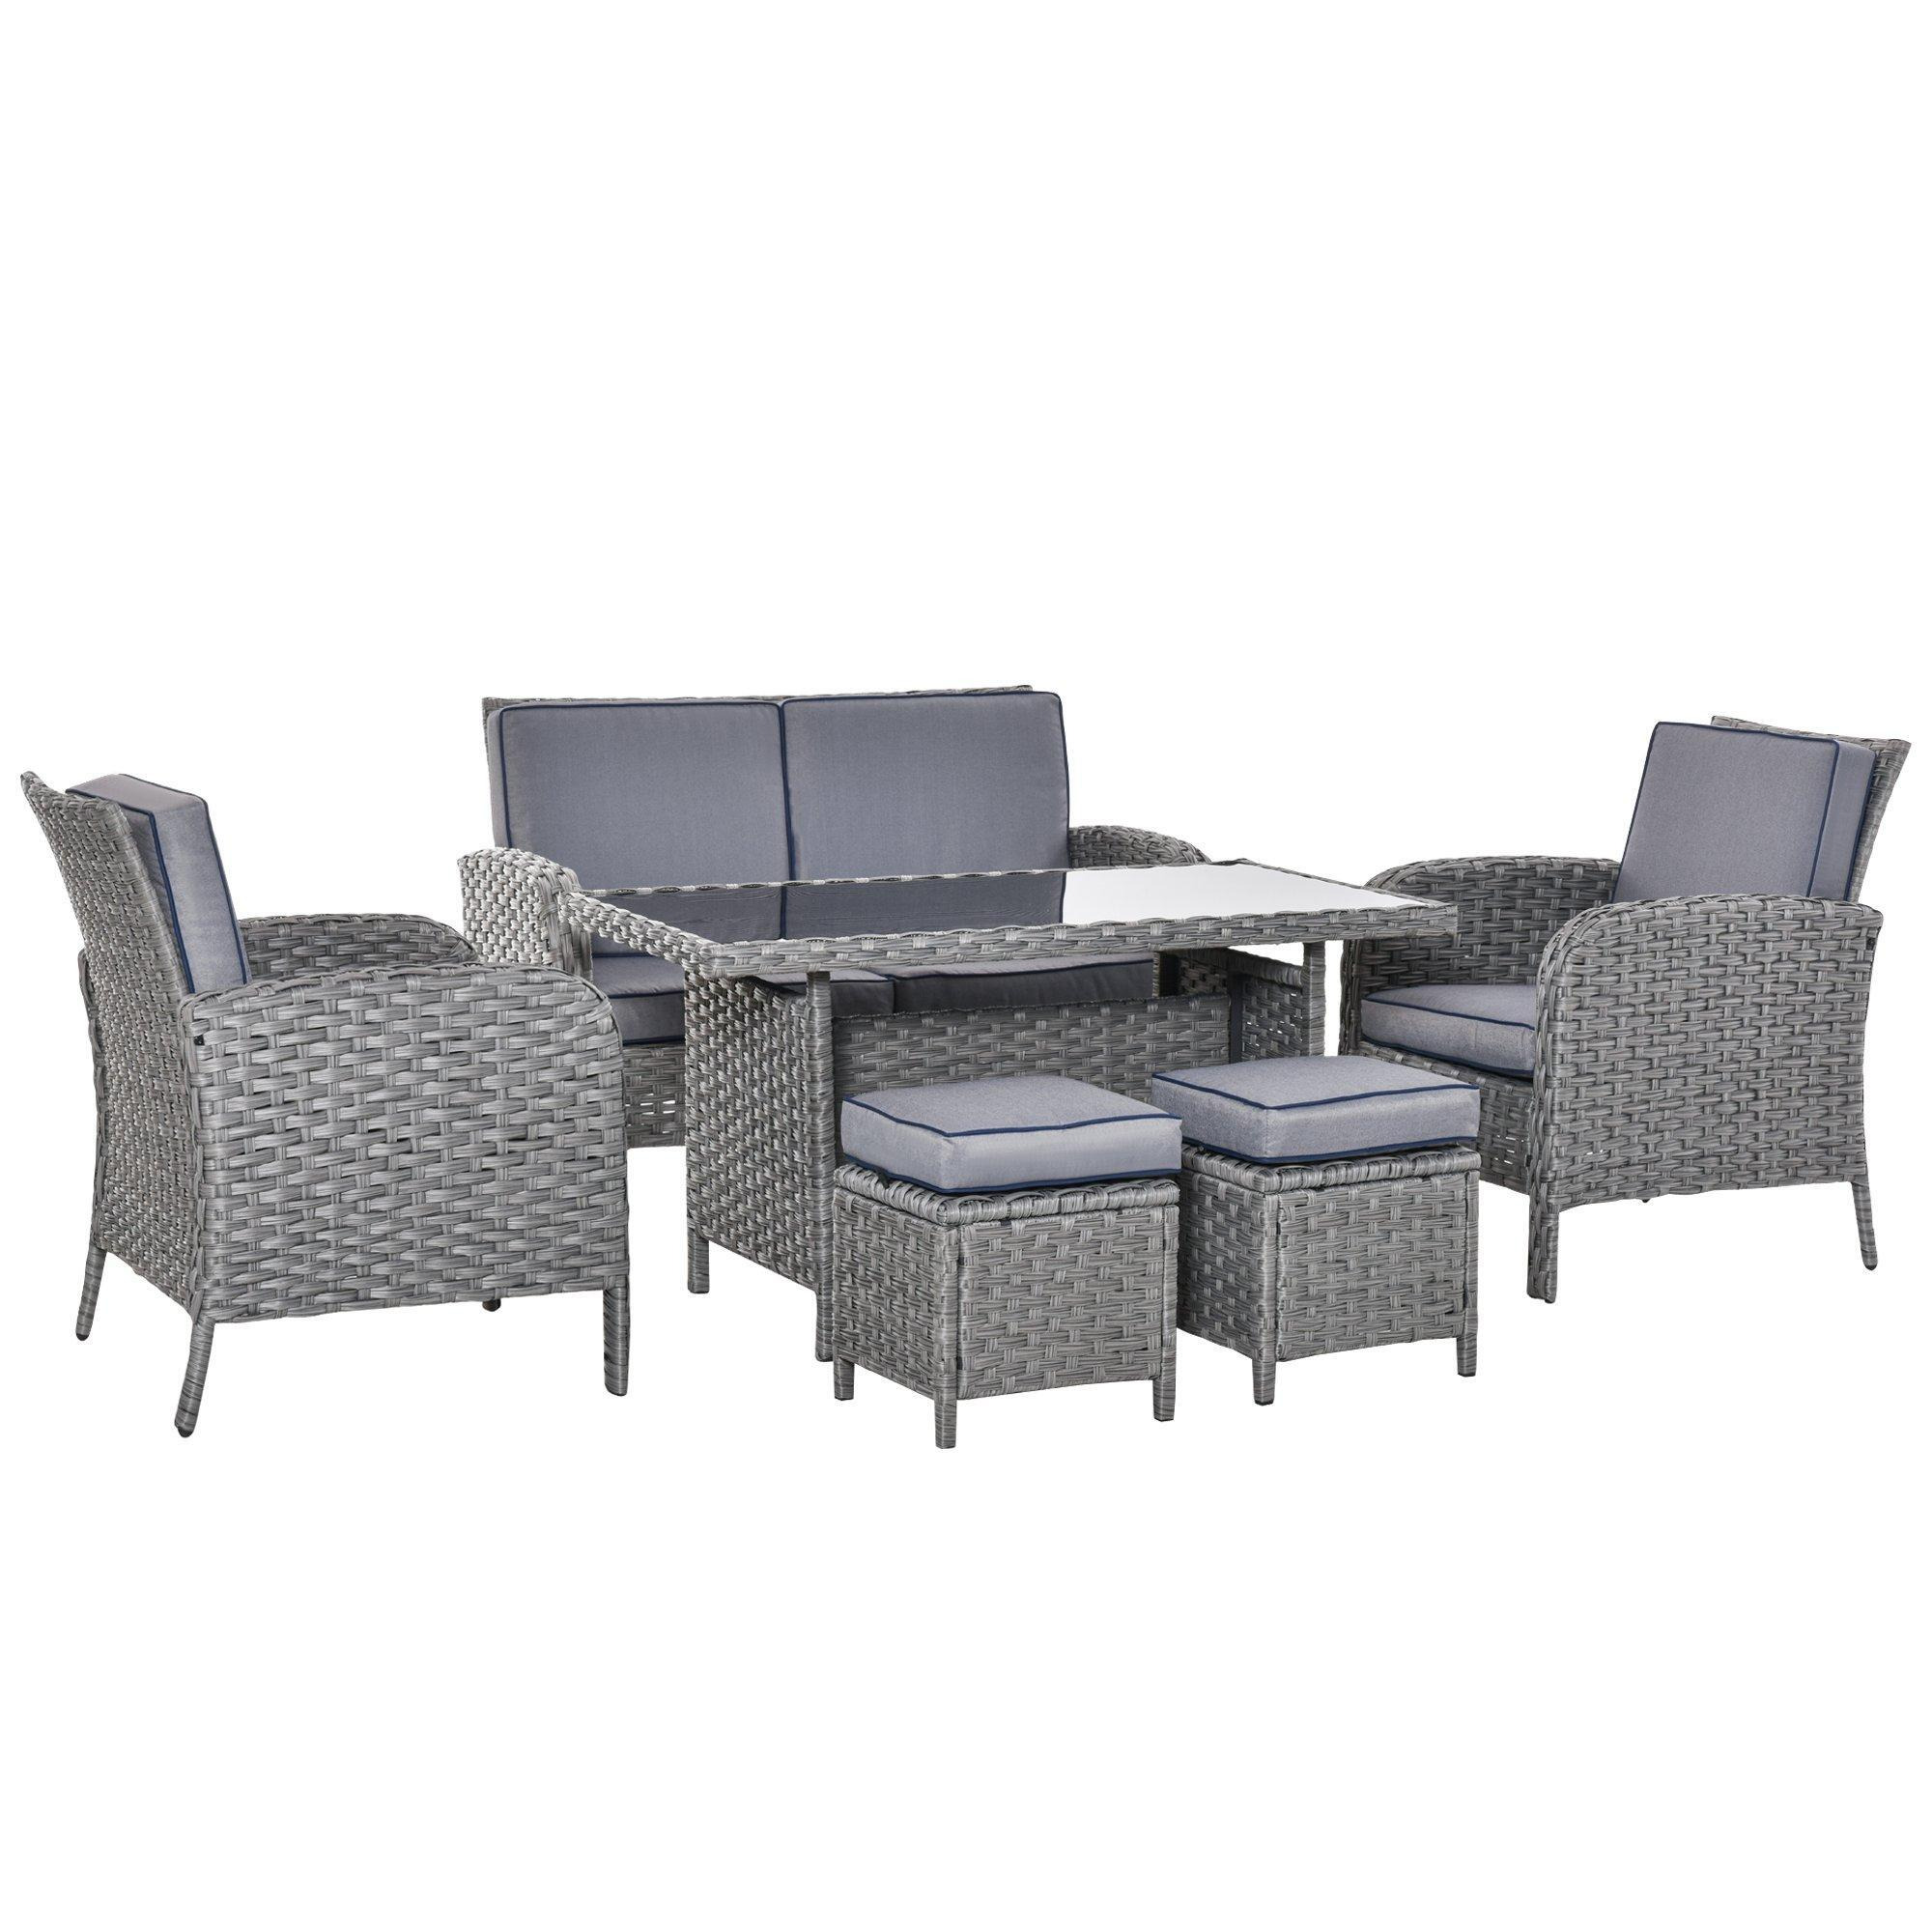 6 PCS Outdoor All Weather PE Rattan Dining Table Sofa Furniture Sets w/ Cushions - image 1